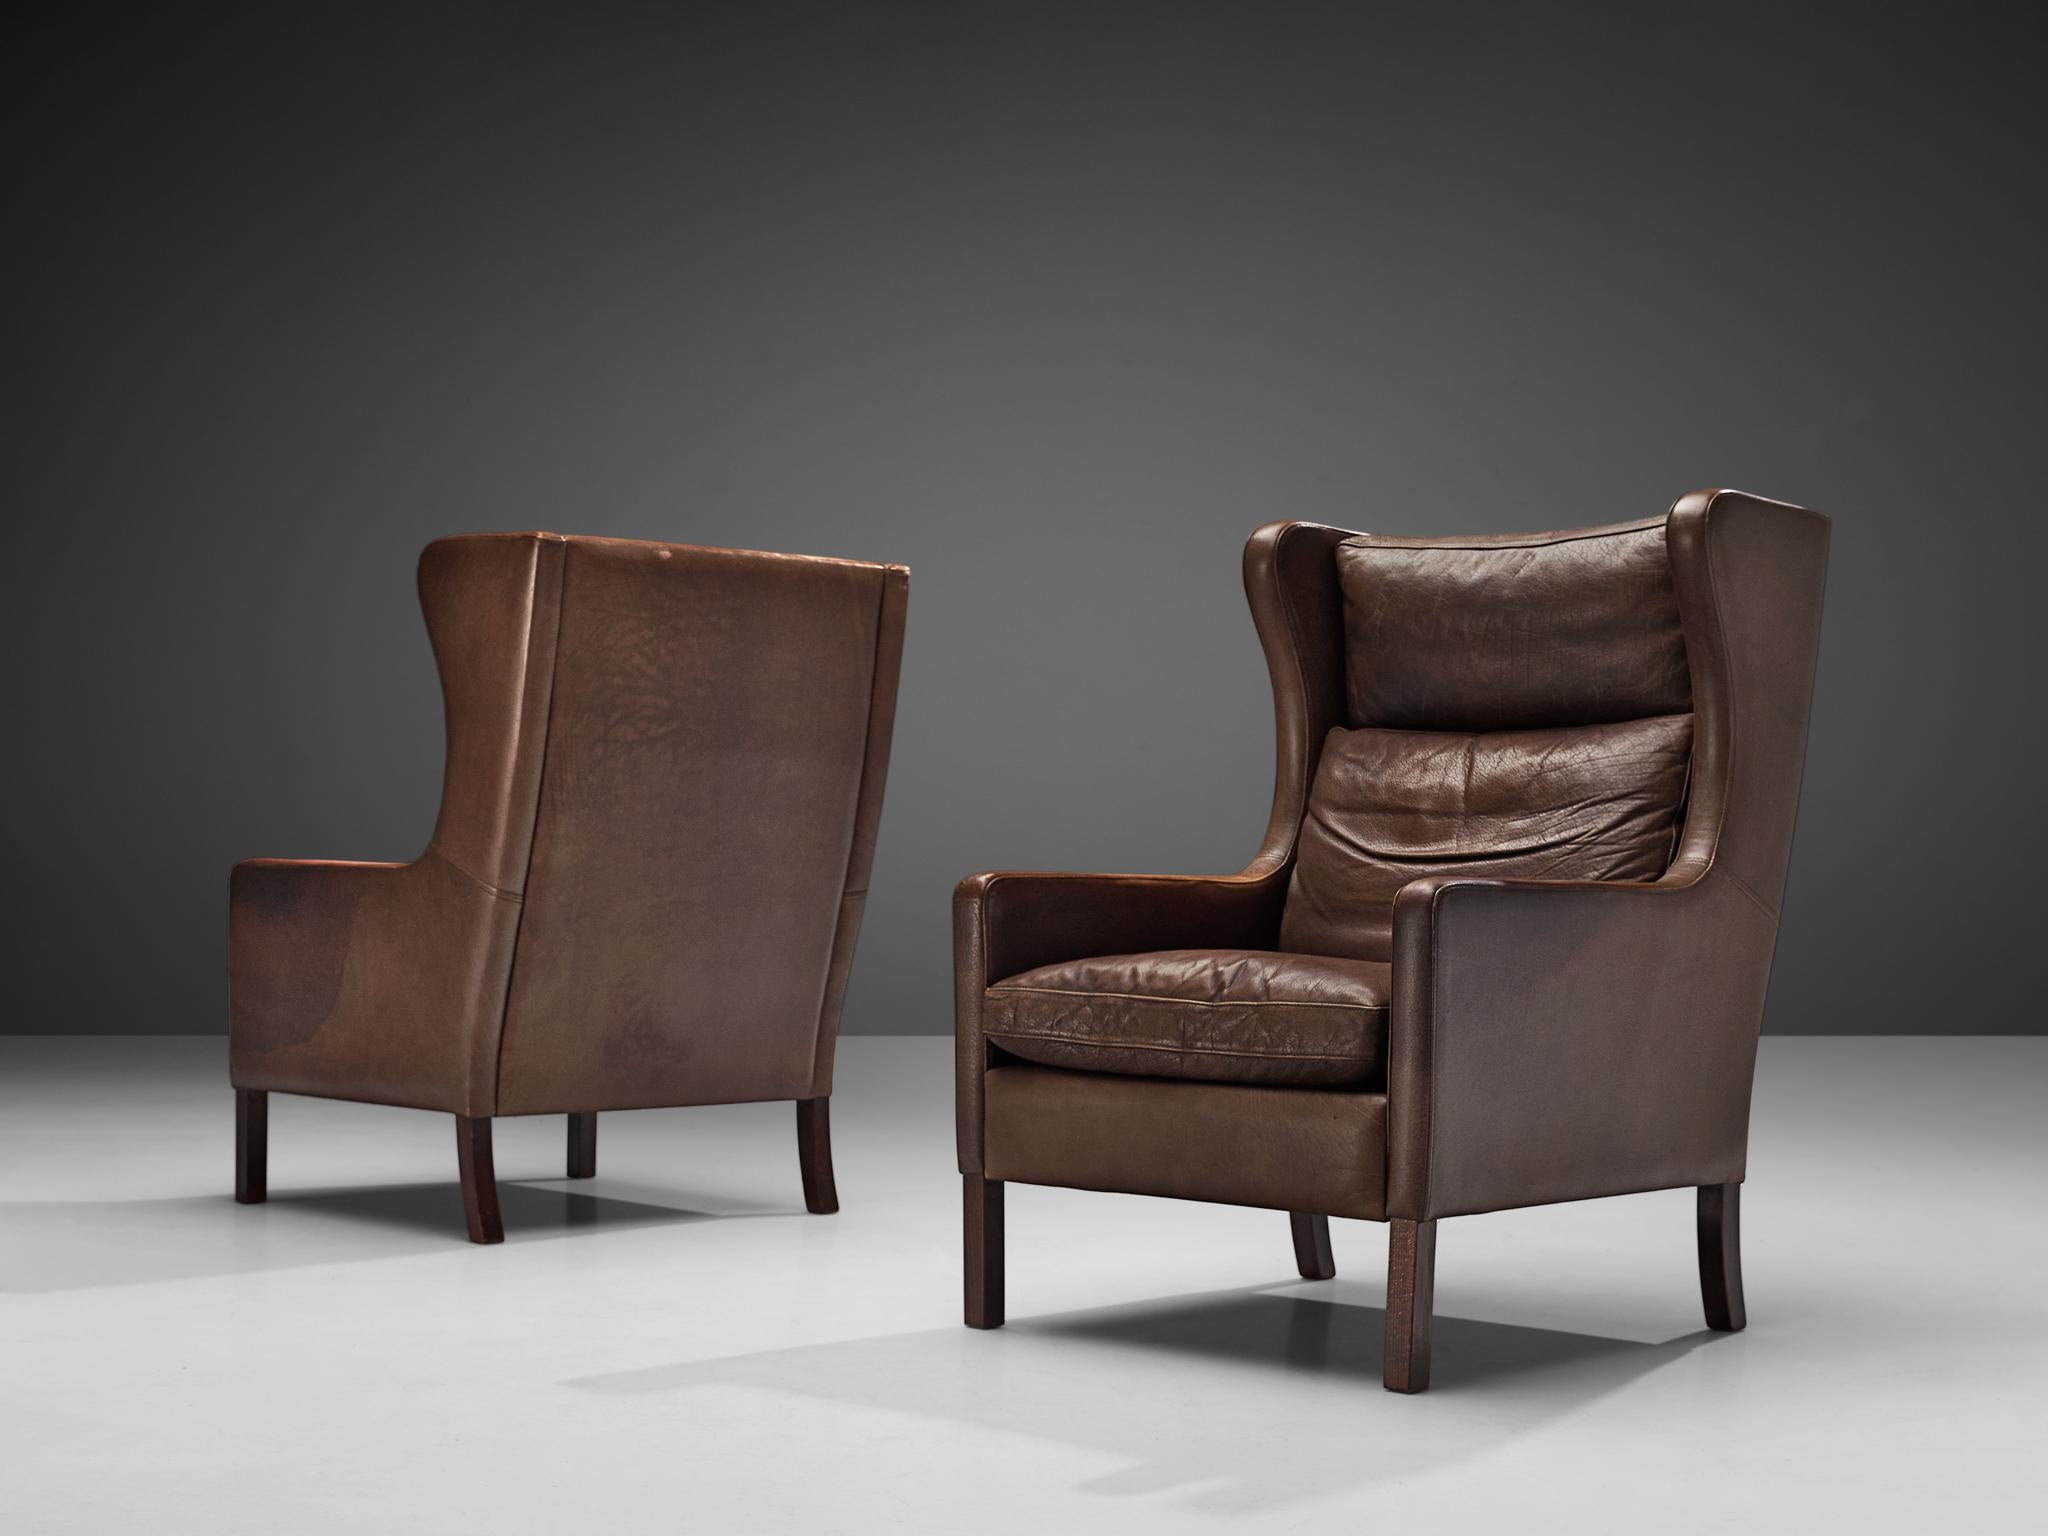 Stouby Denmark, pair of lounge chairs, leather, Denmark, 1940s
 
Danish wingback lounge chair in the style of Frits Henningsen (1889-1965). Both chairs are upholstered in a dark brown leather that shows admirable patina. The design is